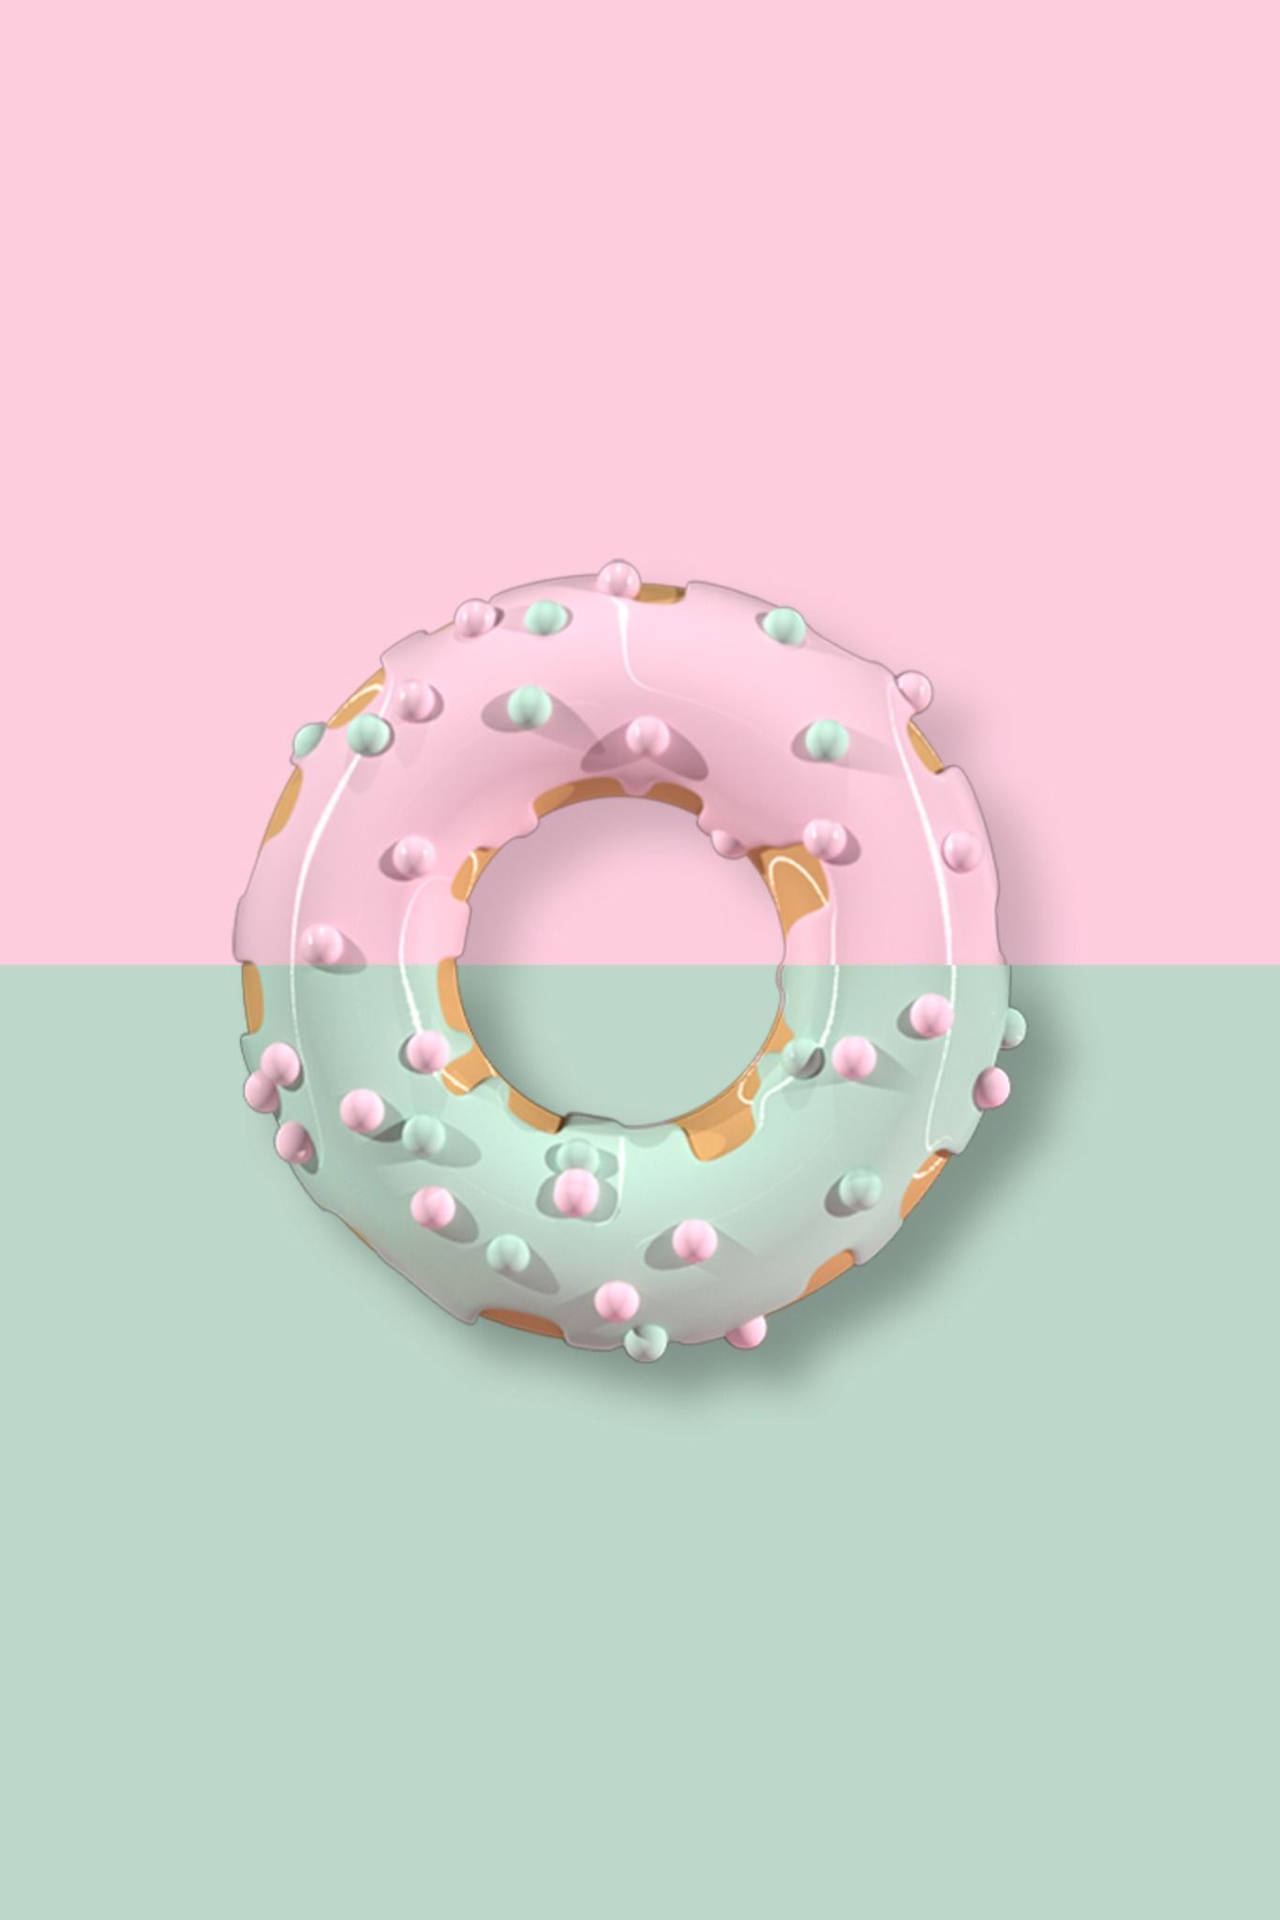 Pastel-colored Donut